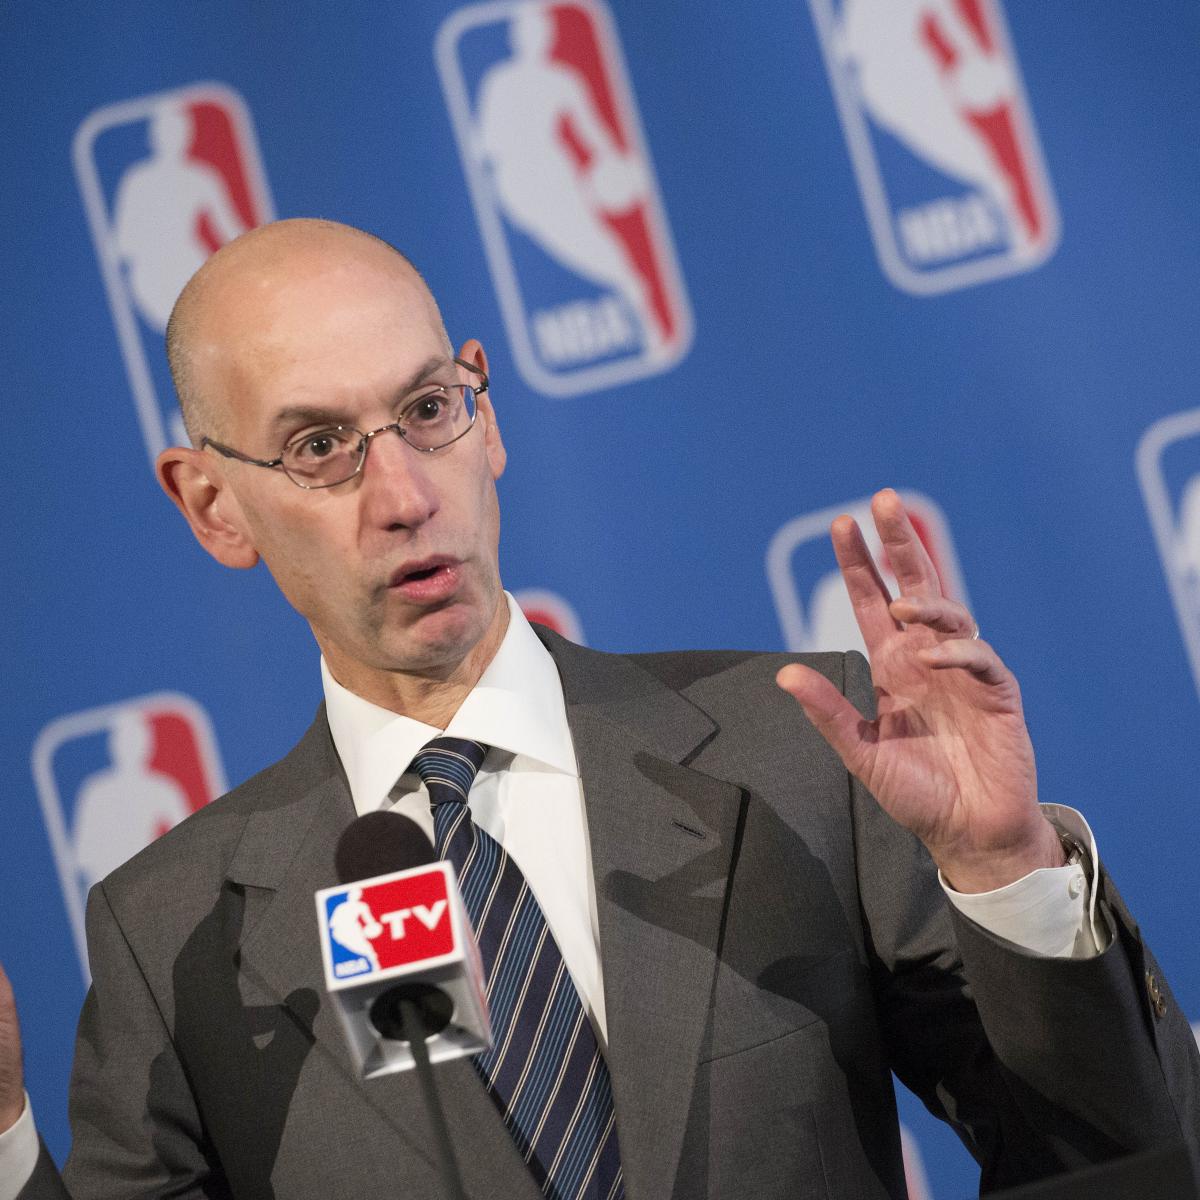 NBA Owners to Discuss Plan to Put Corporate Logos on Jerseys | News ...